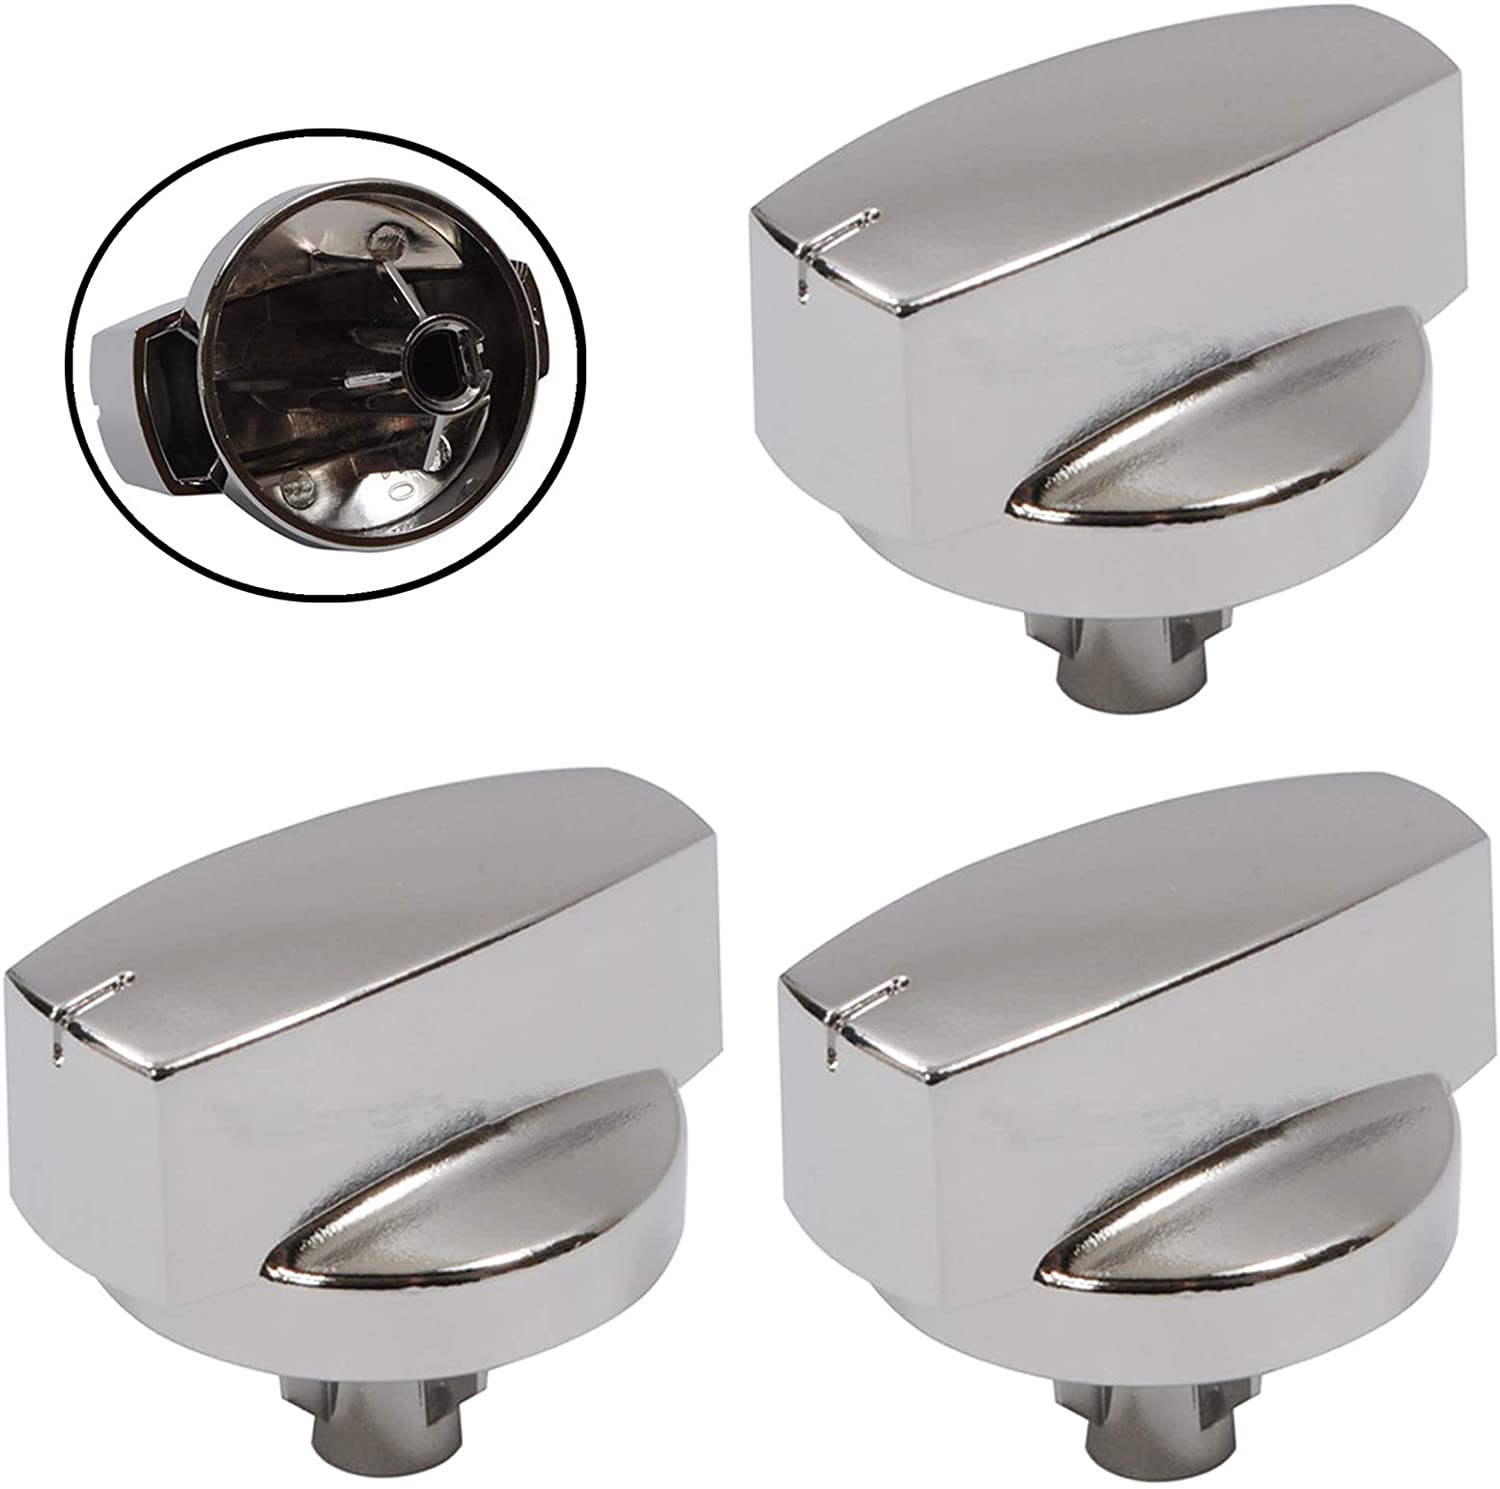 BELLING Oven Cooker Knob Function Control Switch 444445412 444445413 1000DF (Silver/Chrome) Pack of 3